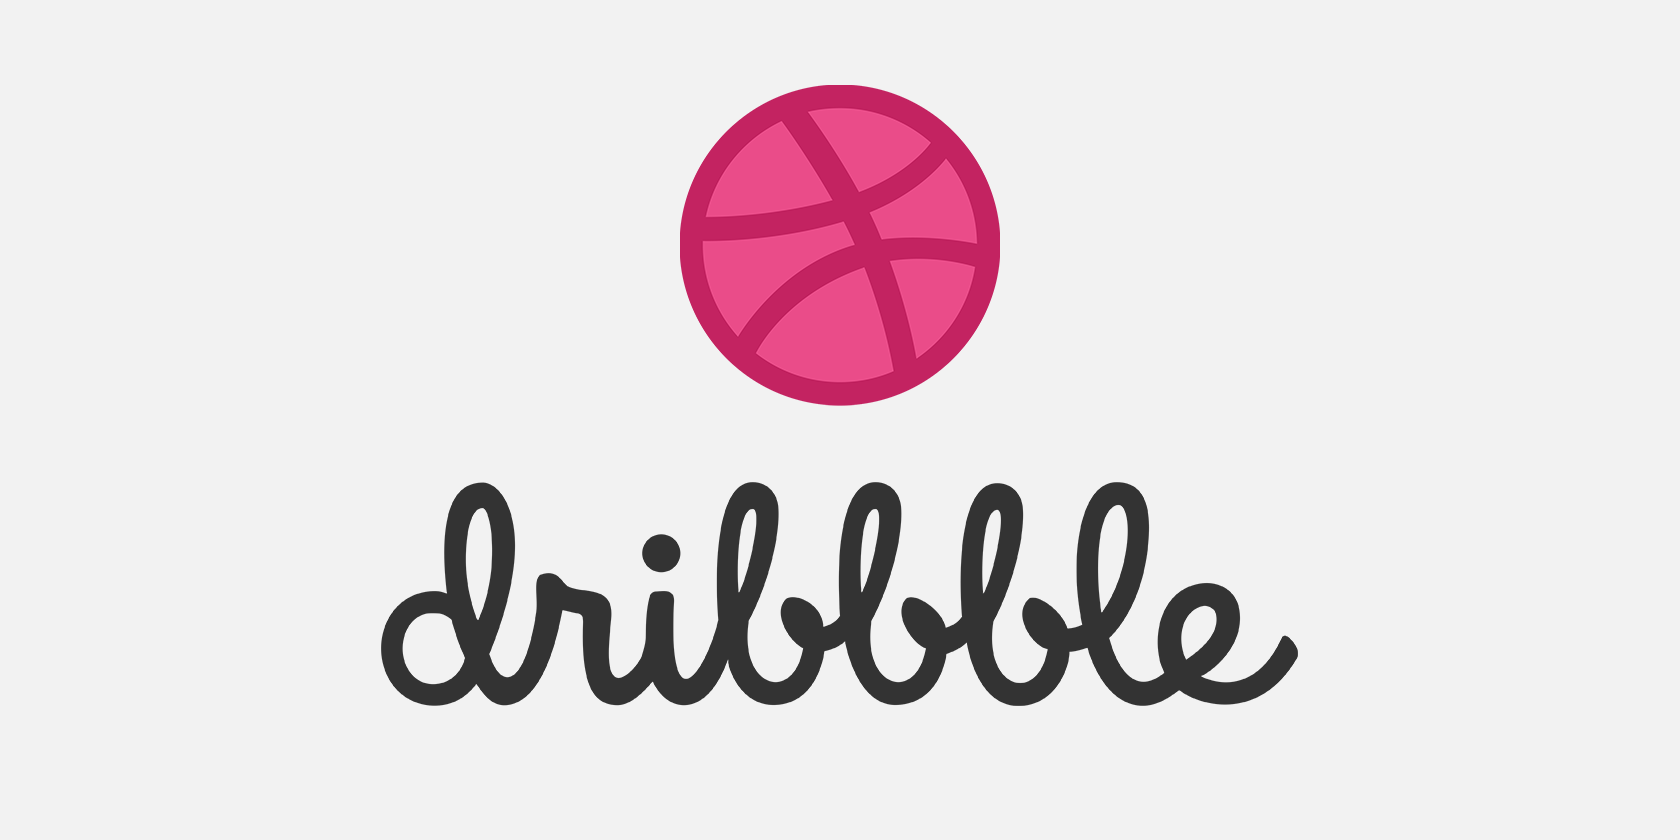 You Can Now Apply For A Designer Account On Dribbble